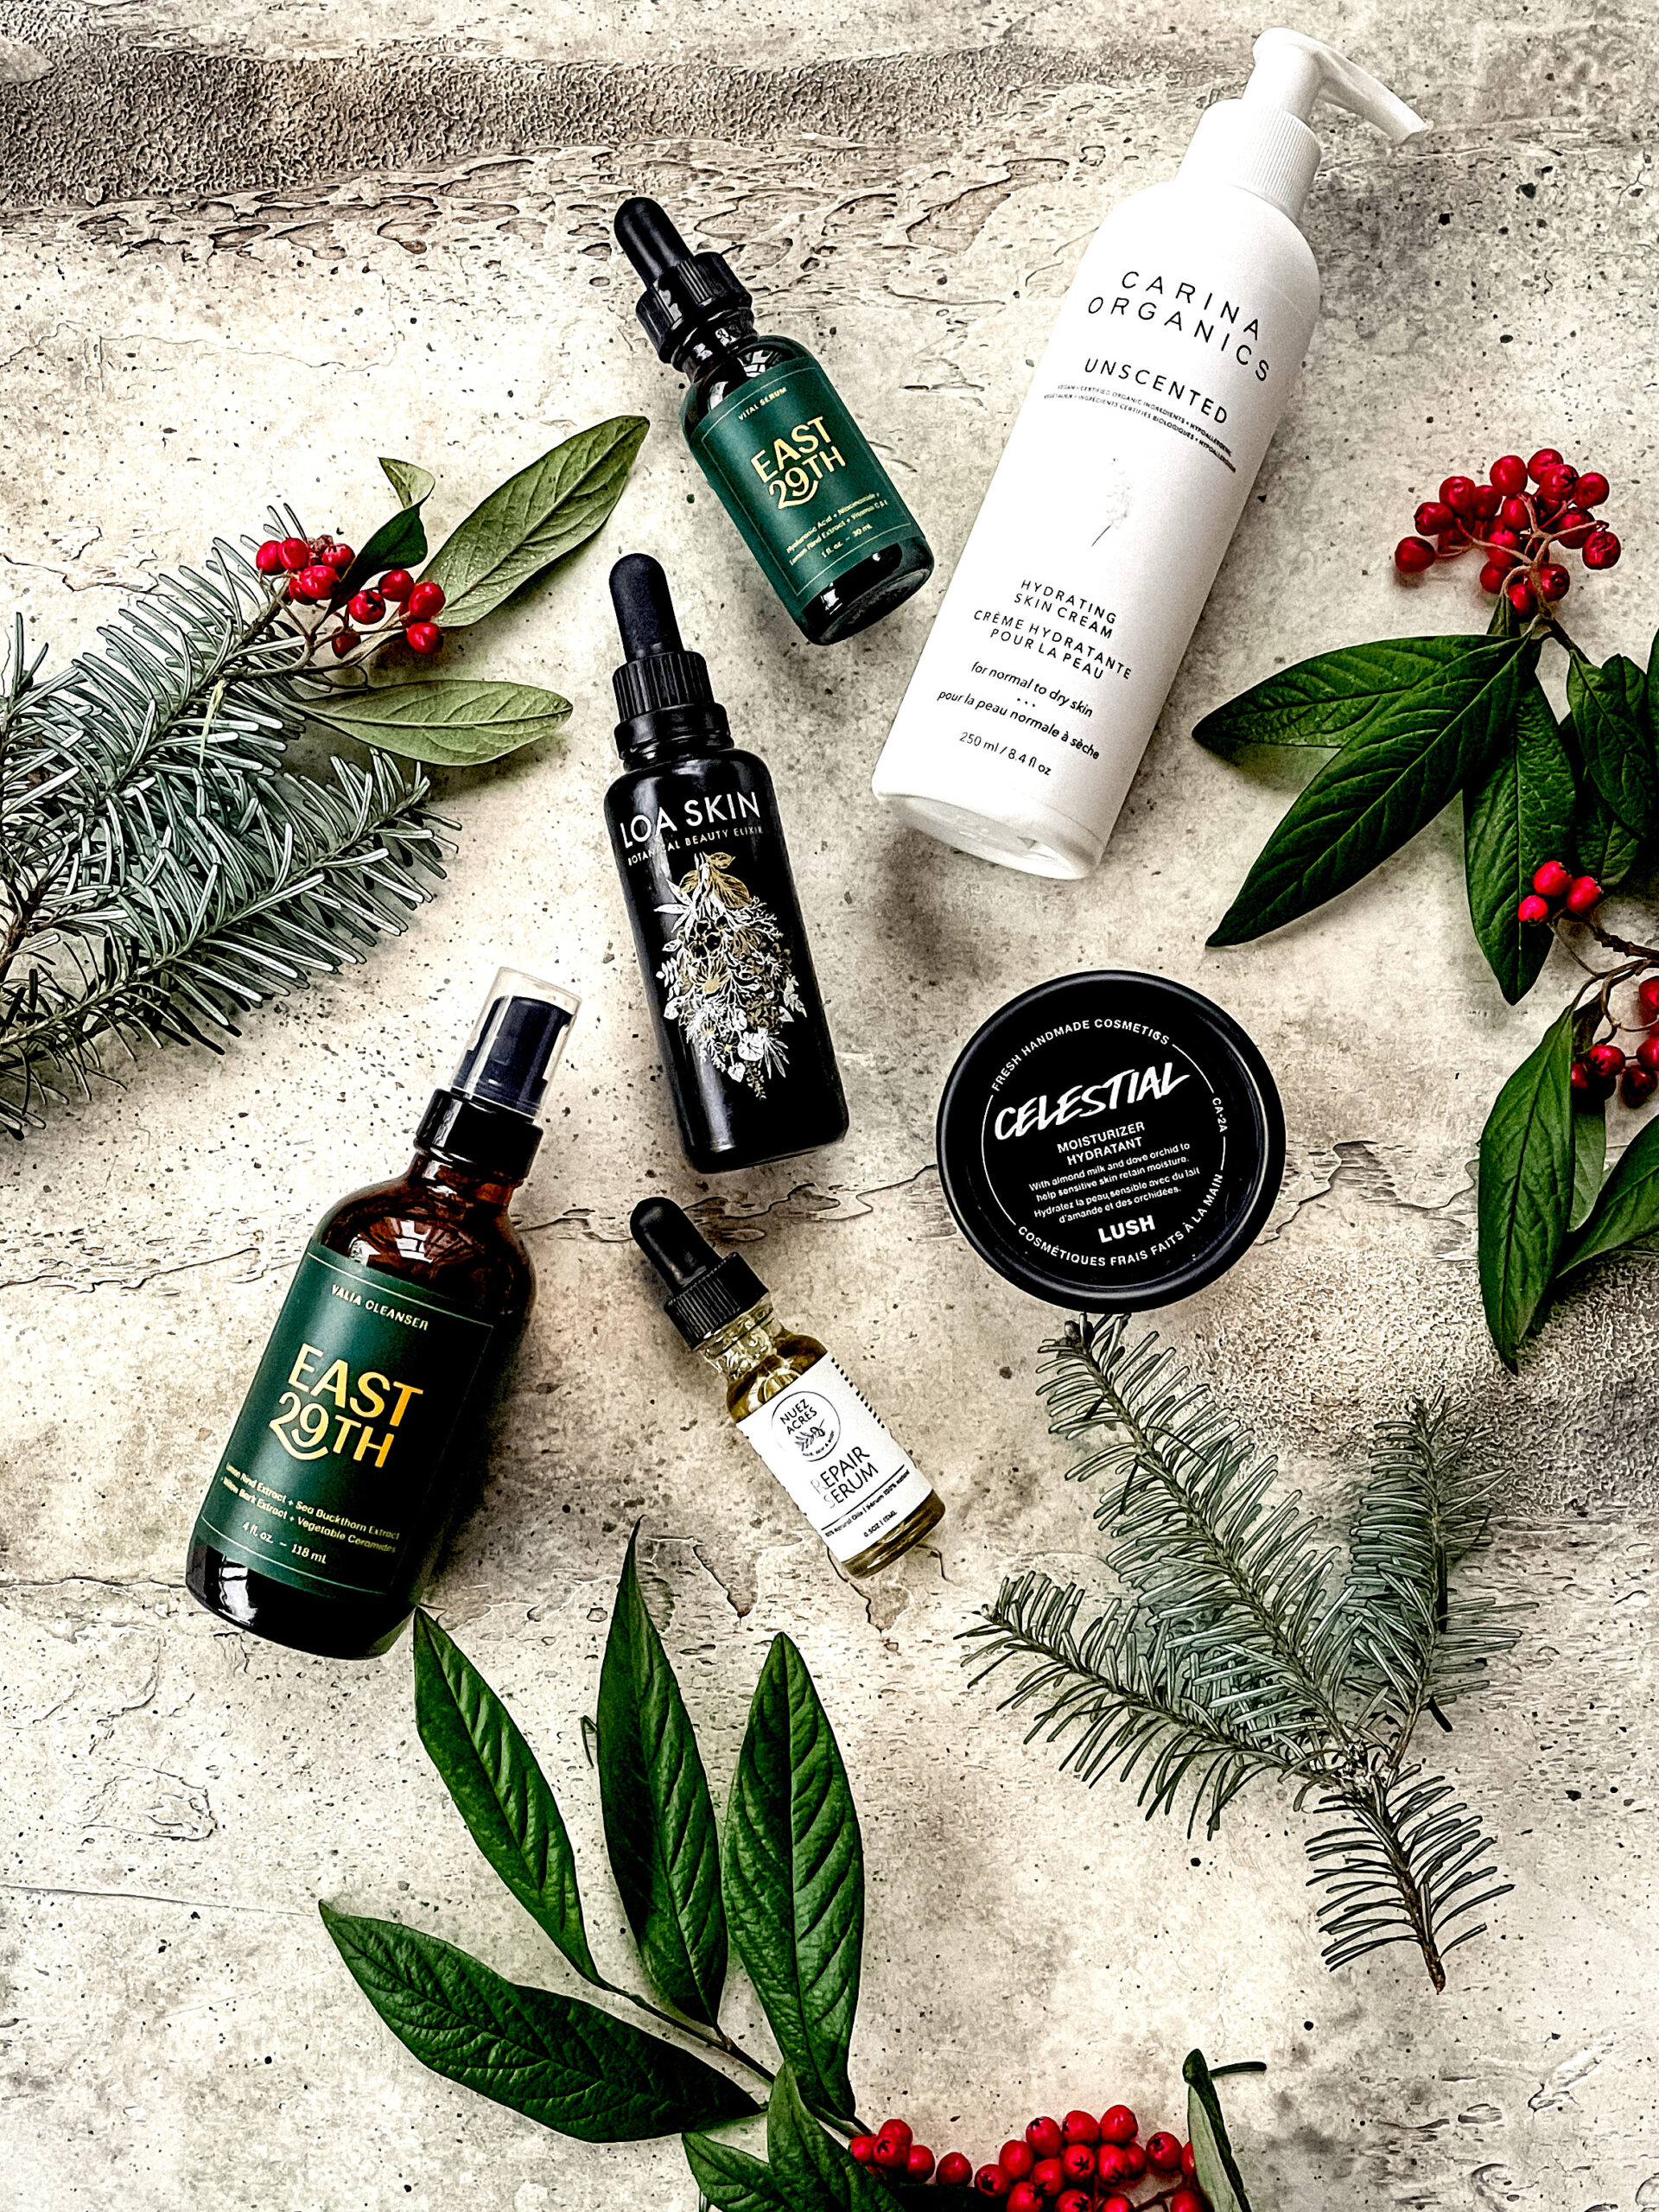 10 Vegan Gift Ideas for Christmas 2021 - Vancouver with Love - vegan cosmetics